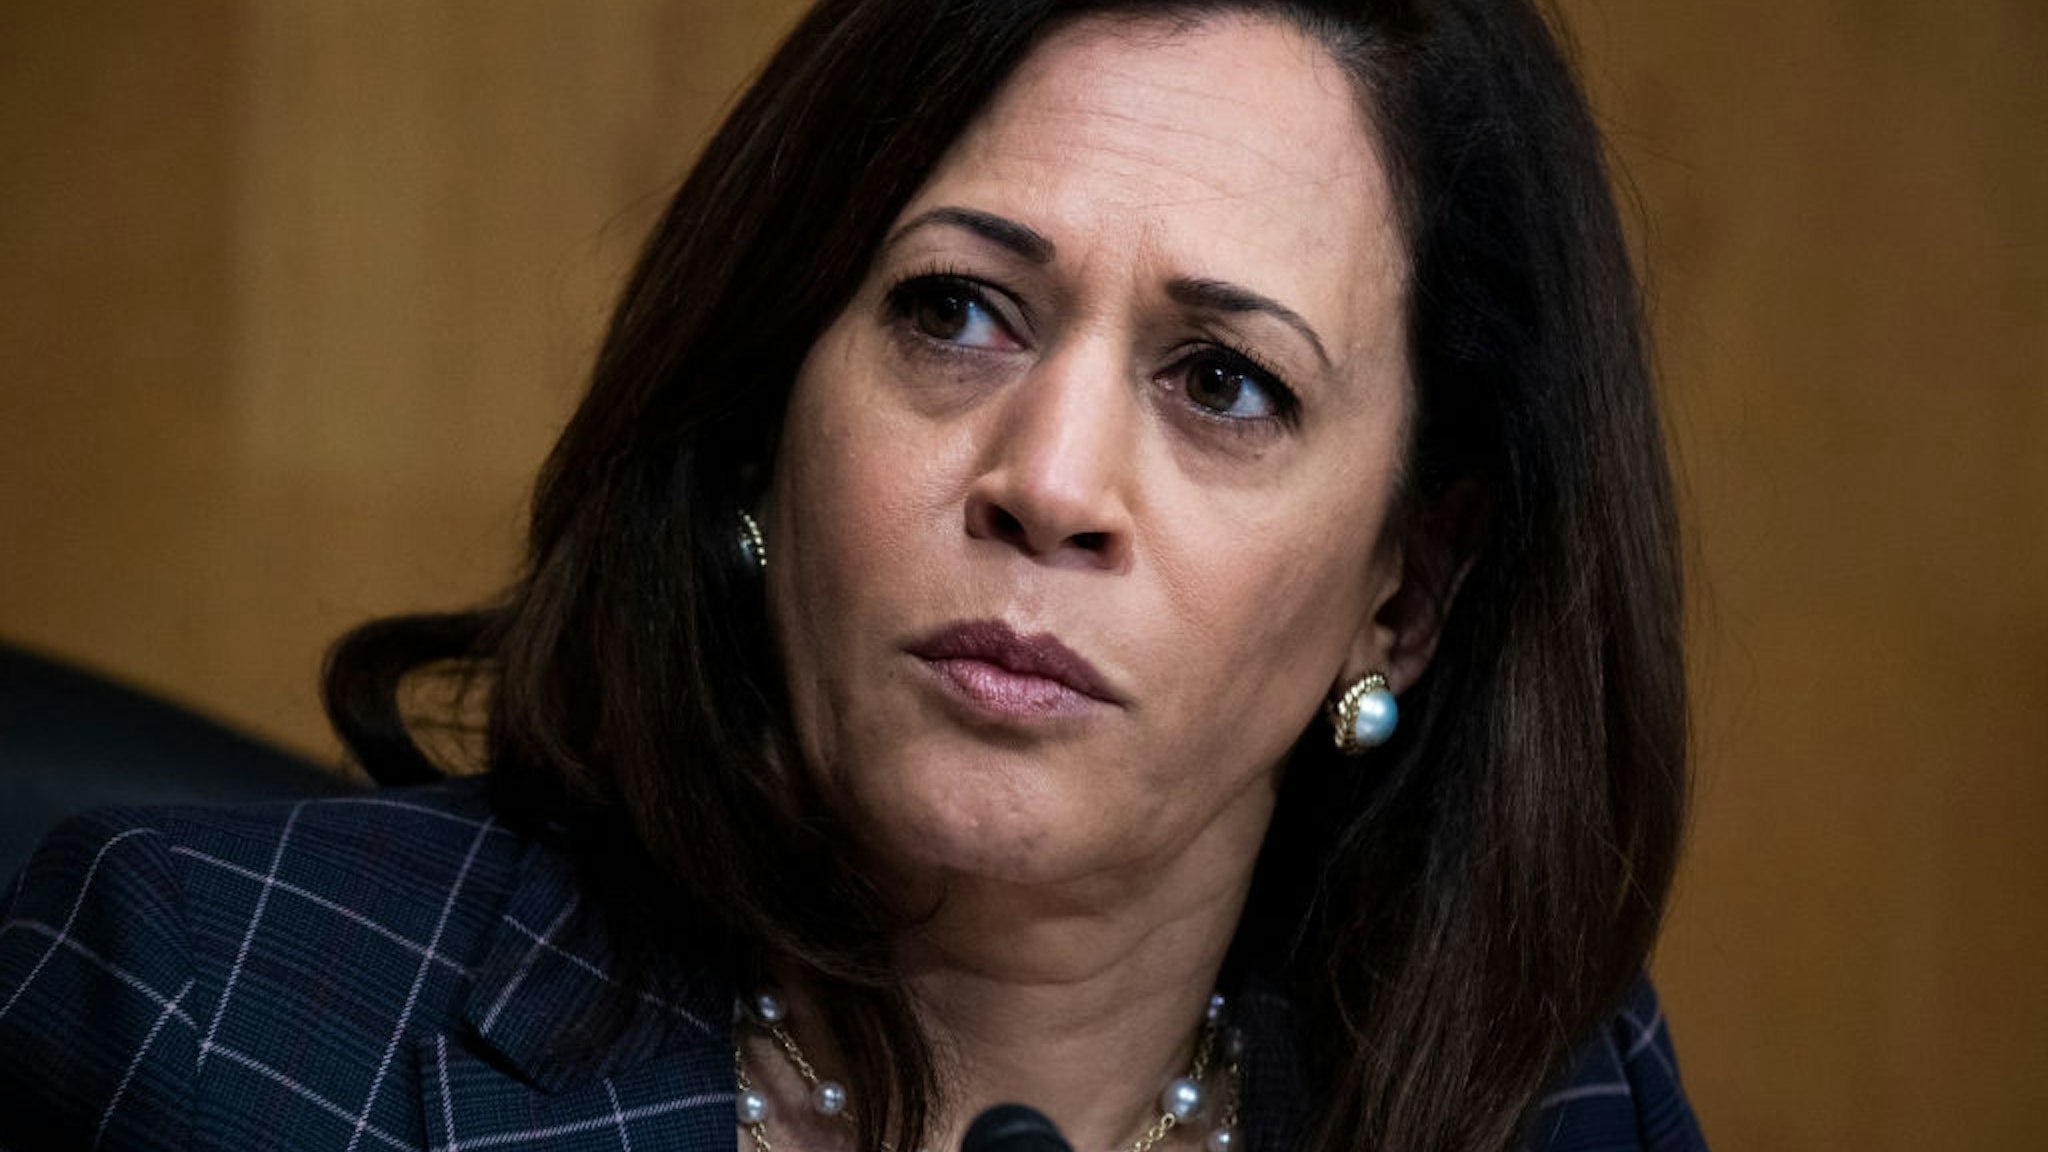 Sen. Kamala Harris (D-CA) attends the Senate Homeland Security and Governmental Affairs Committee hearing titled "CBP Oversight: Examining the Evolving Challenges Facing the Agency" in Dirksen Senate Office Building on June 25, 2020 in Washington, DC.